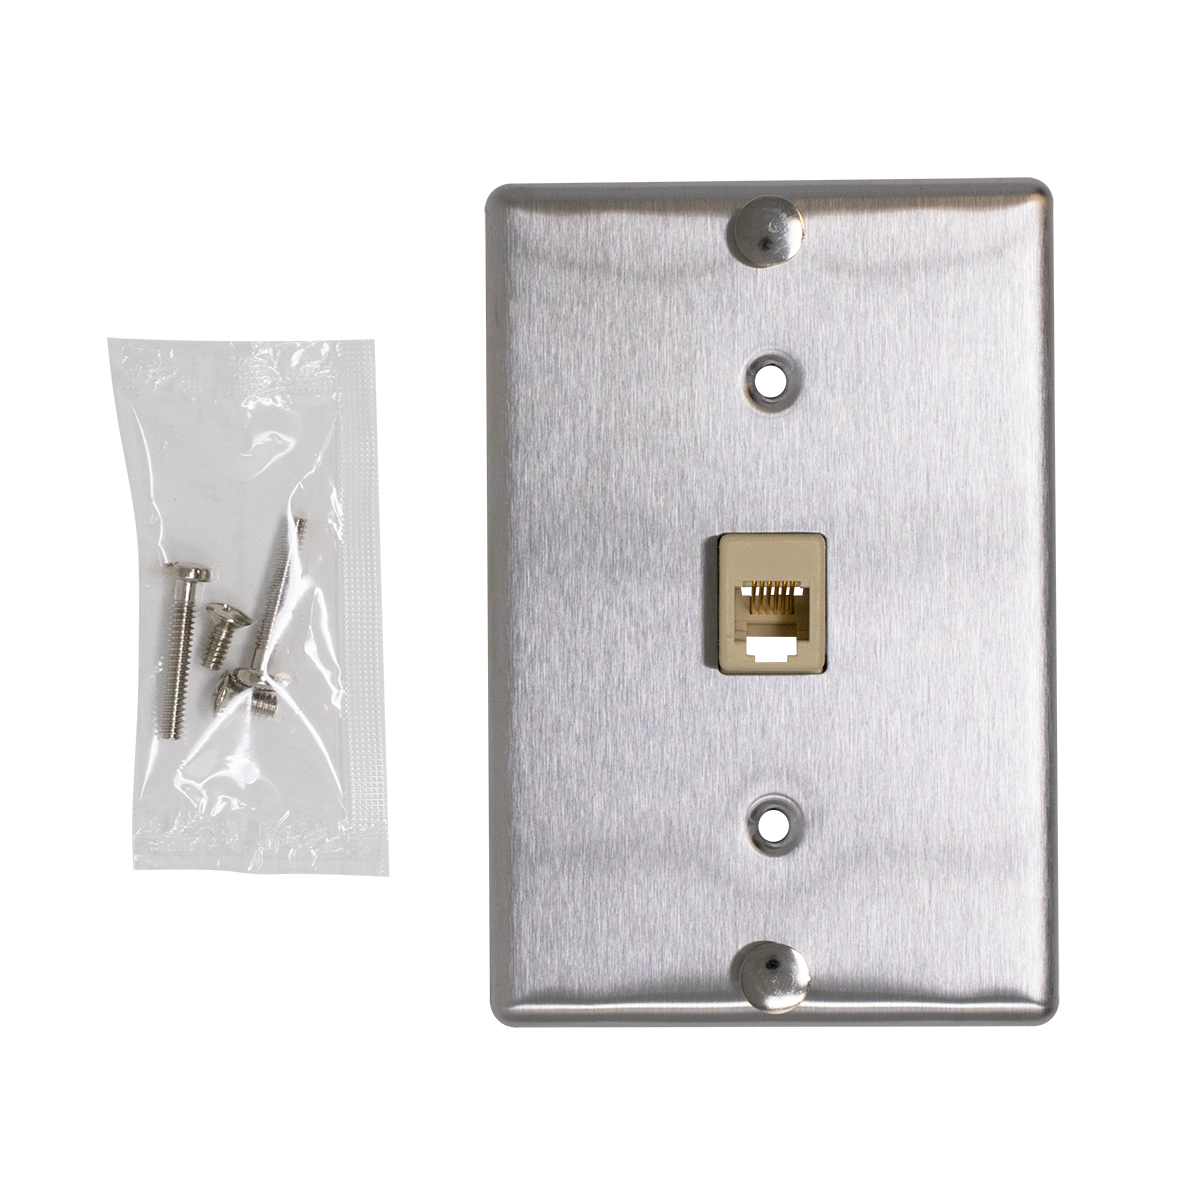 6 COND STAINLESS WALL PHONE JACK